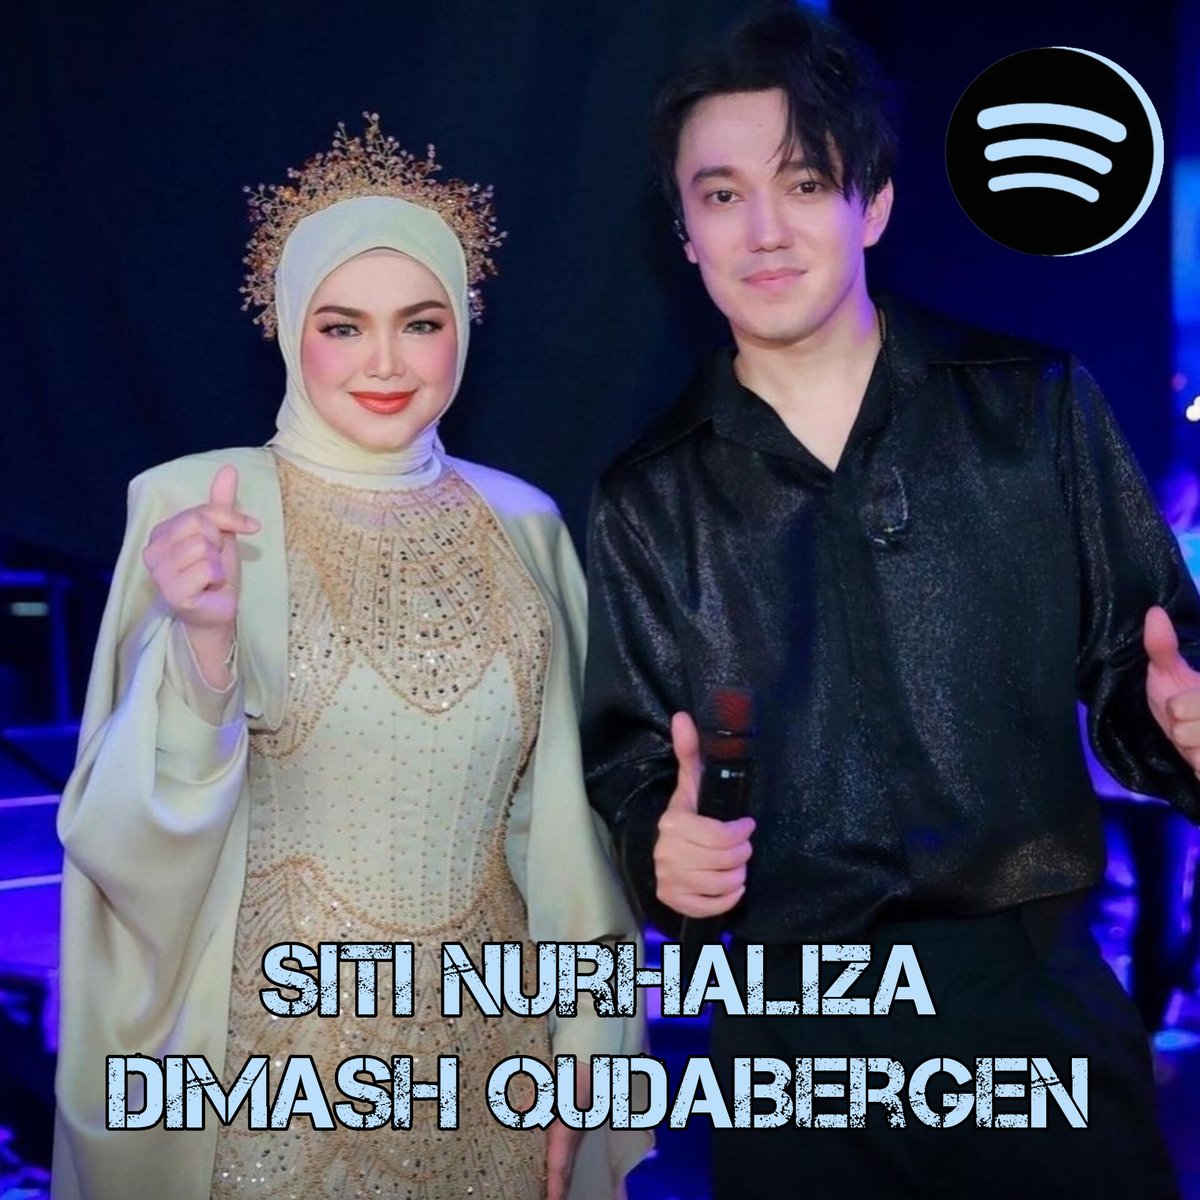 Listen to the amazing vocalists Siti Nurhaliza and Dimash Qudaibergen who shared the stage at the concert in Kuala Lumpur Malaysia on 24th June 2023 - Axiata Arena
open.spotify.com/playlist/6FGUD…

#spotifyplaylist #SitiNurhaliza #DimashQudaibergen  #DimashConcertKualaLumpur 
#PSM #KLSC25